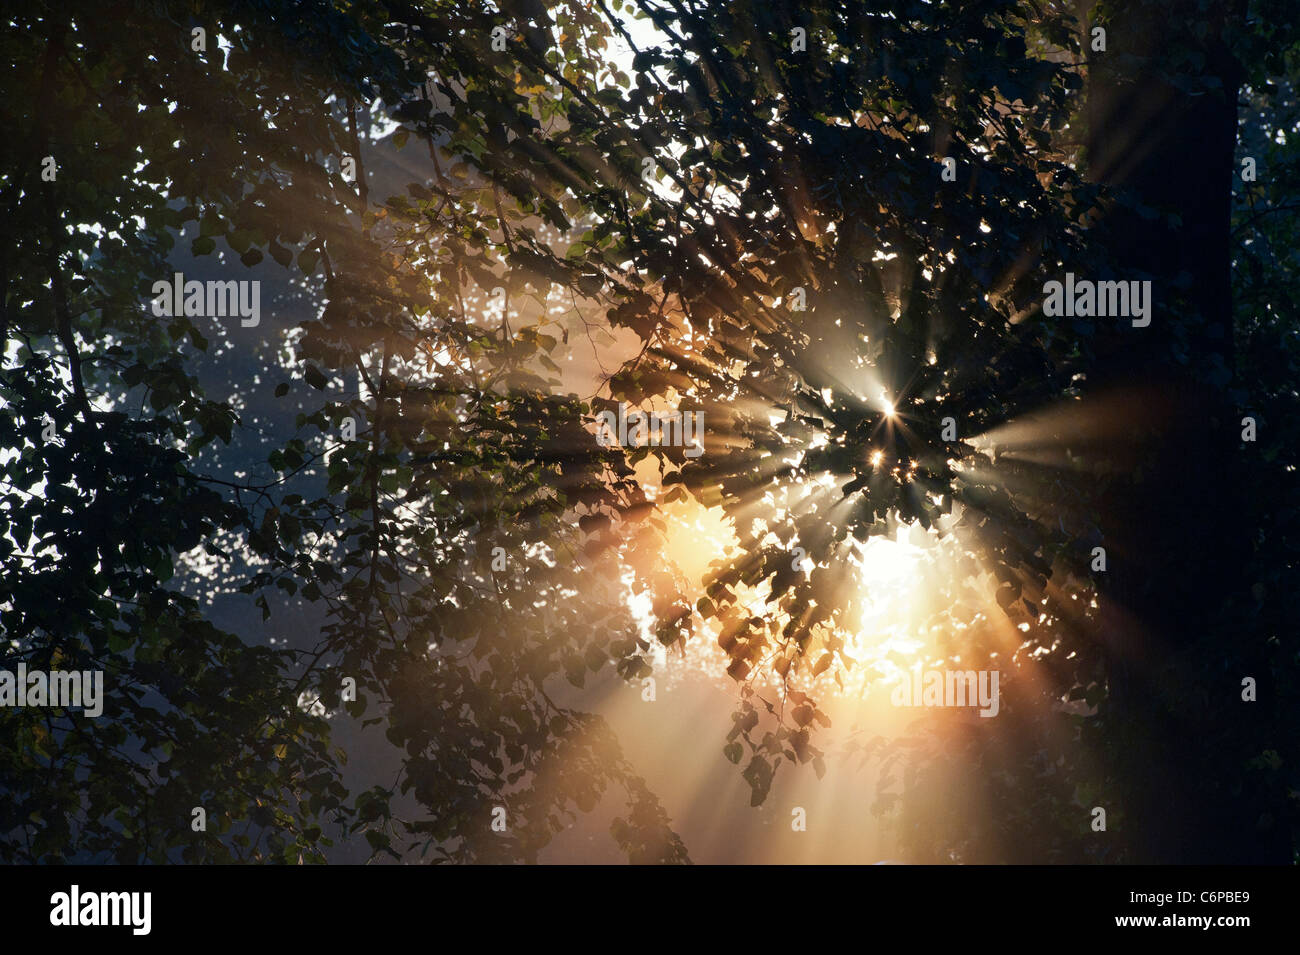 Sun rays through Horse chestnut tree in early morning misty English countryside Stock Photo